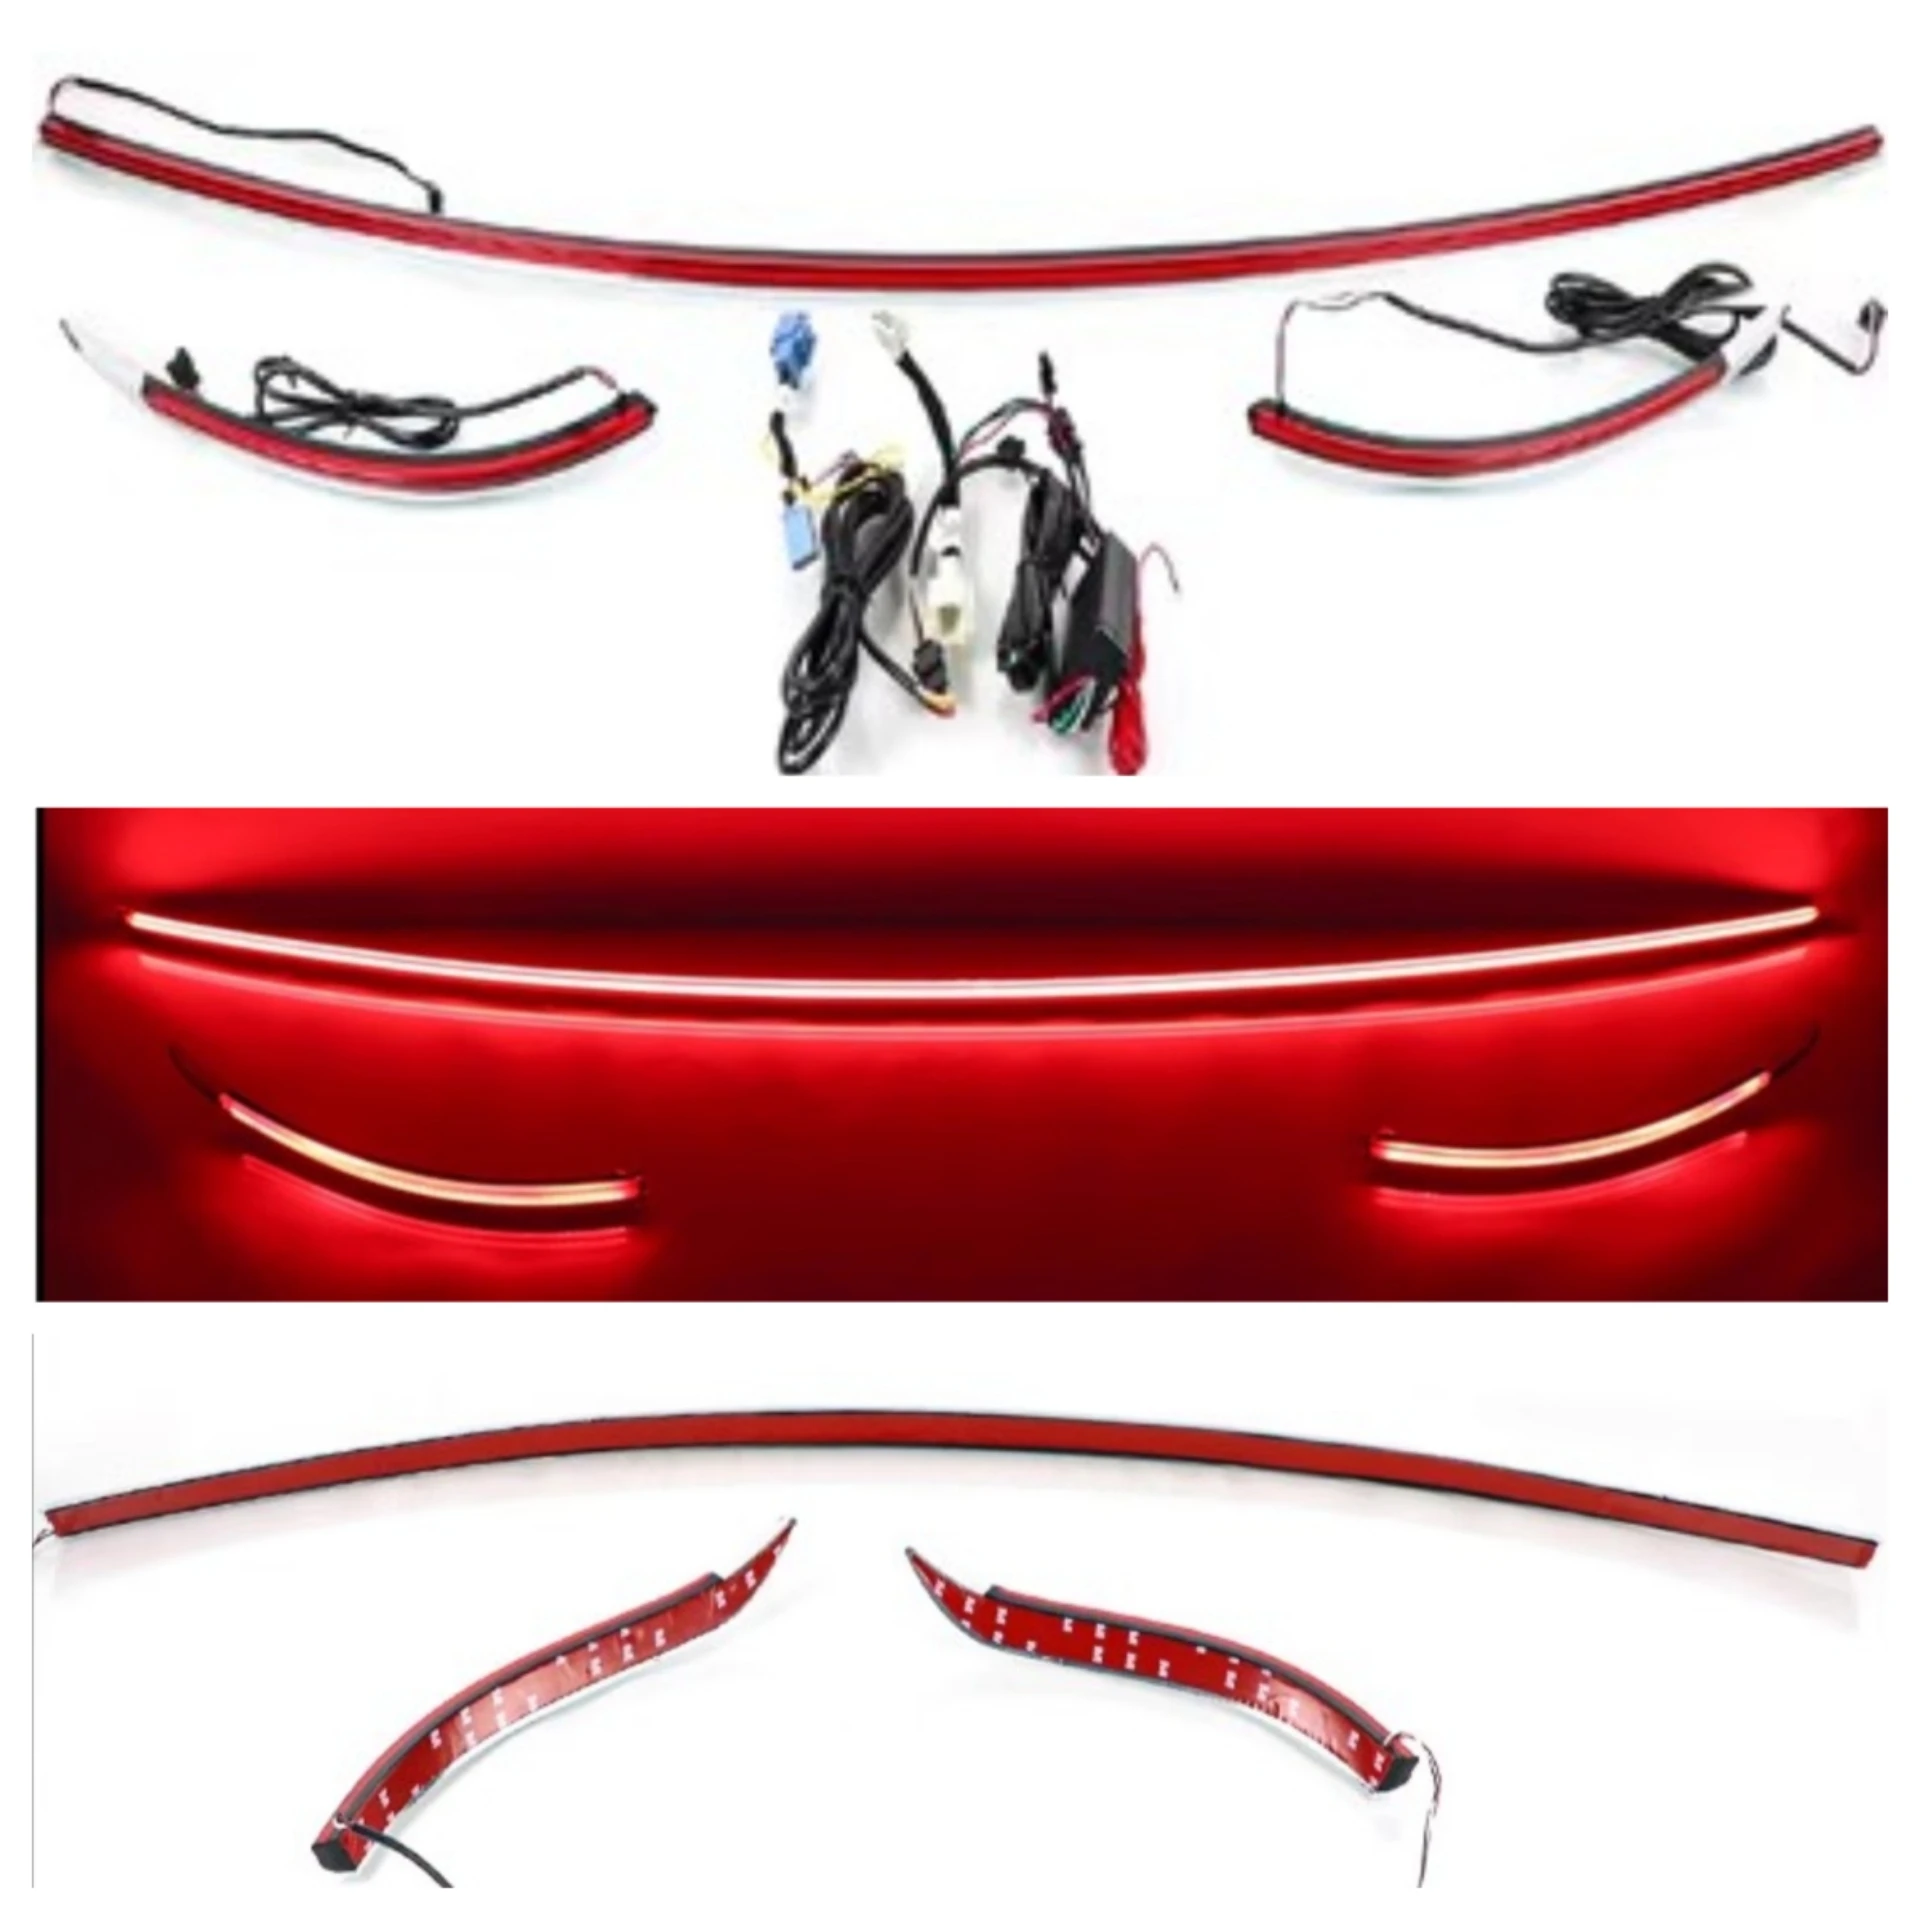 

Body Kit Rear Through Lamp for Mercedes Benz GLC260 GLC200 GLC300 W253 Led Center High Mounted Stop Lamp Car Accessories